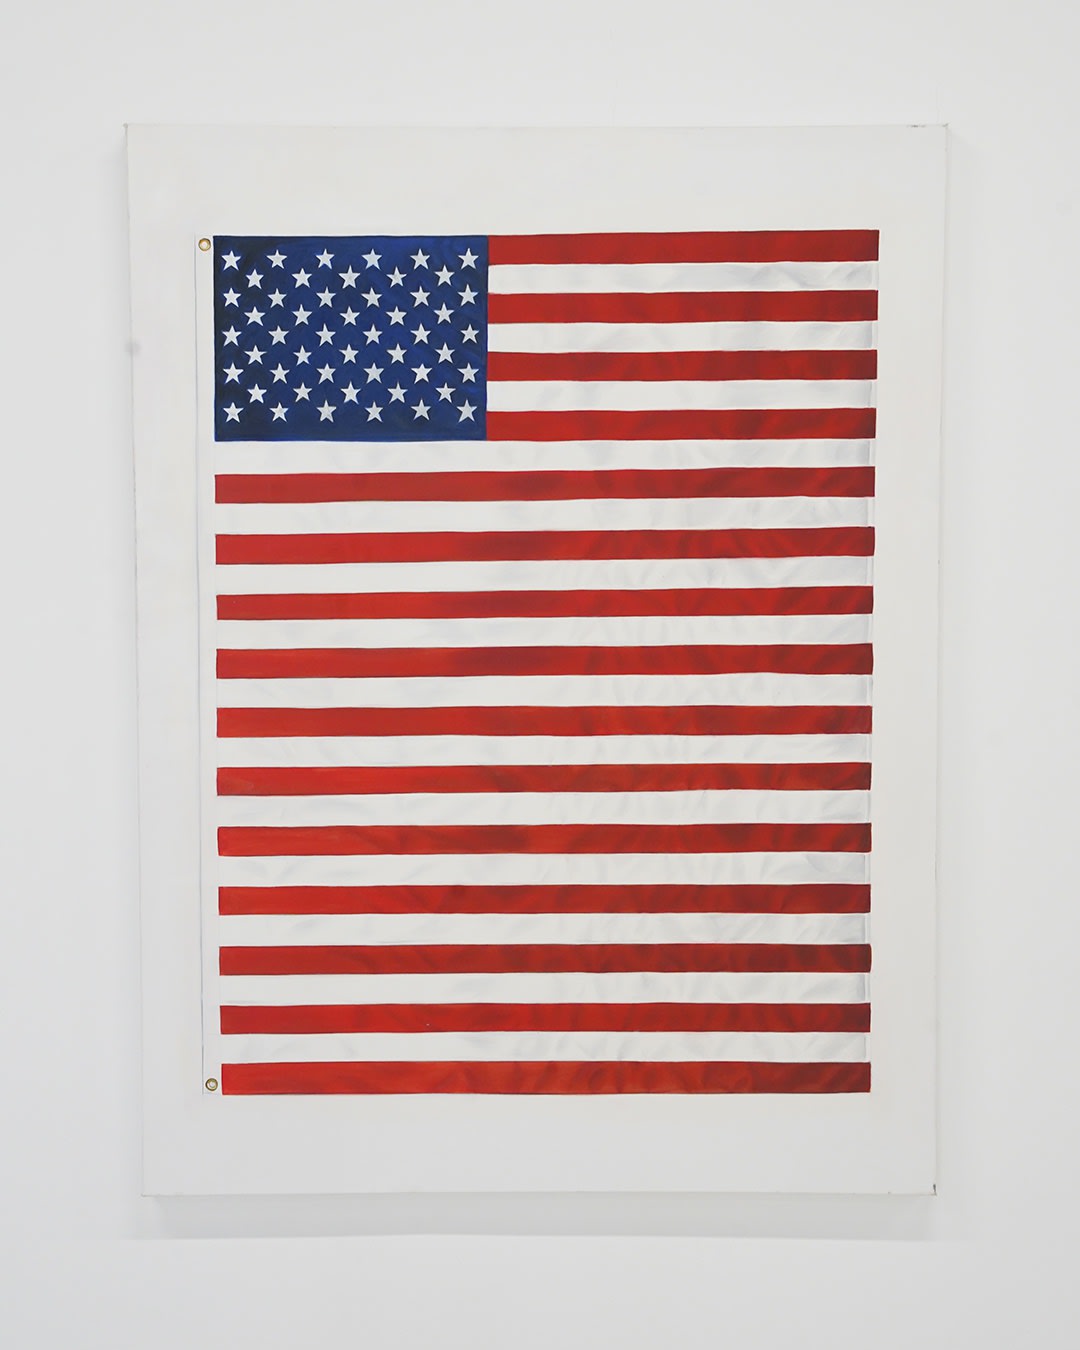 painting of an American flag with extra red stripes